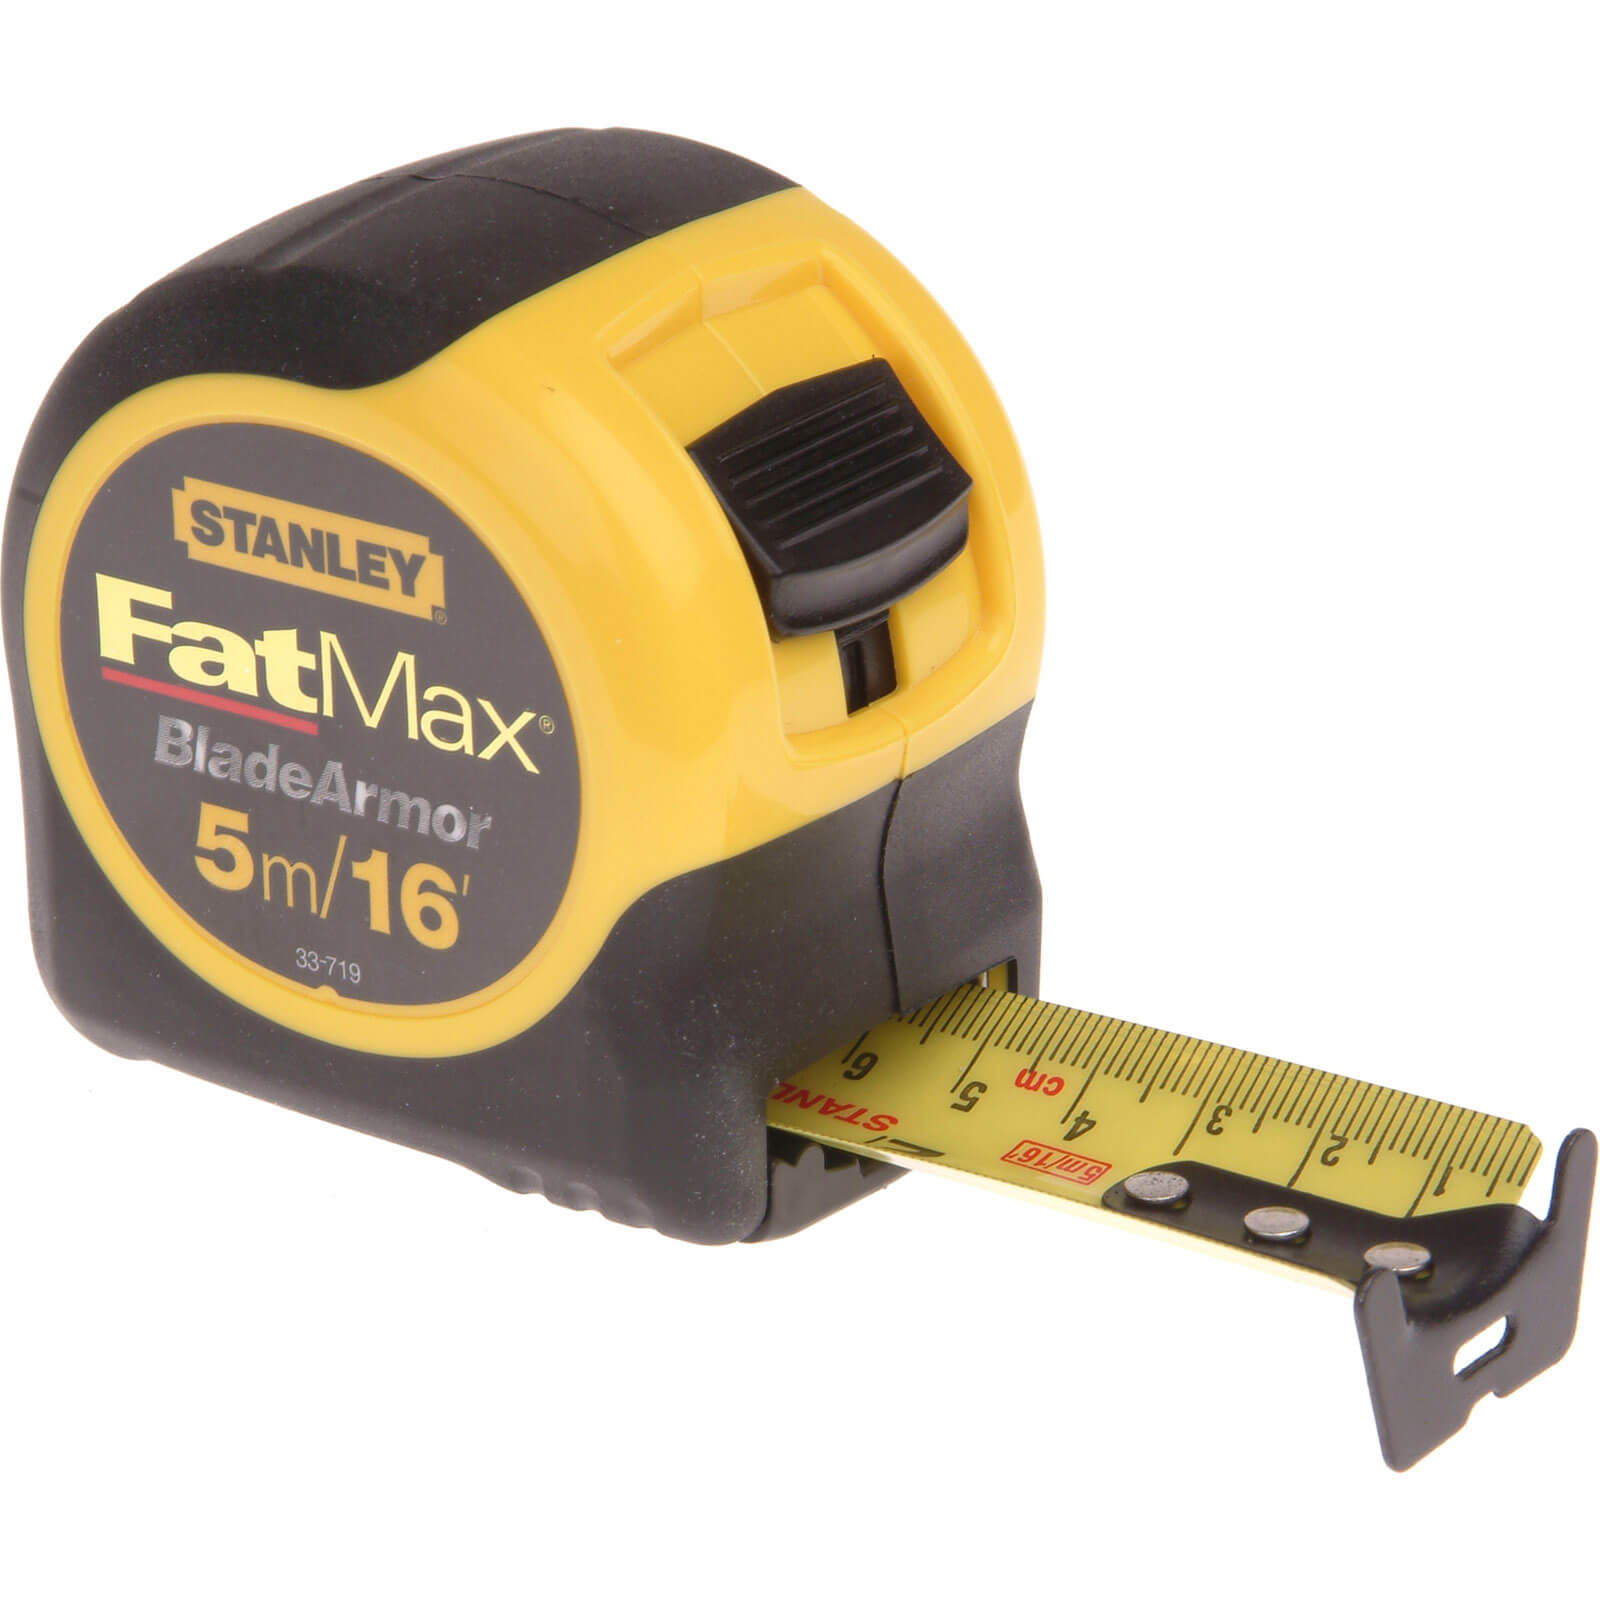 Stanley FatMax Blade Armor Tape Measure 5m 16ft Metric Imperial *SPECIAL OFFER* 